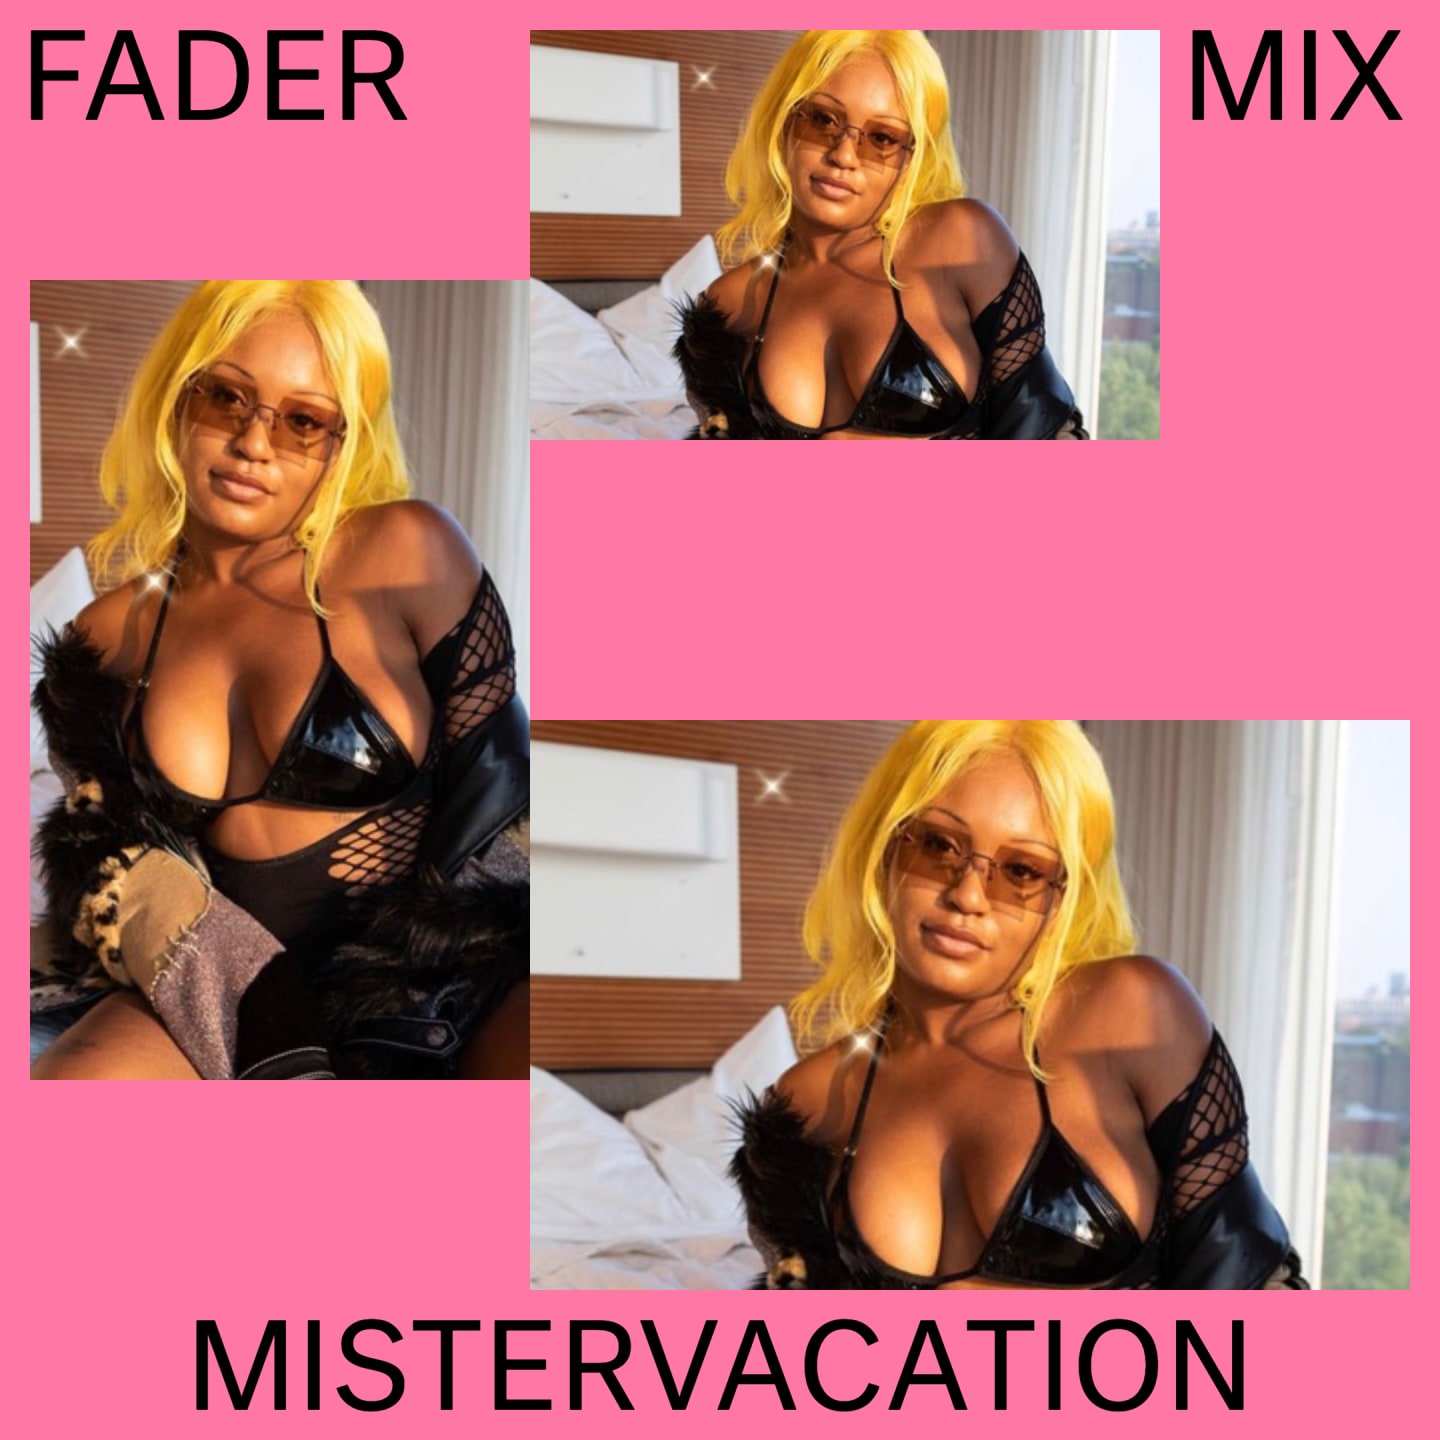 Listen to a new FADER Mix by MISTERVACATION